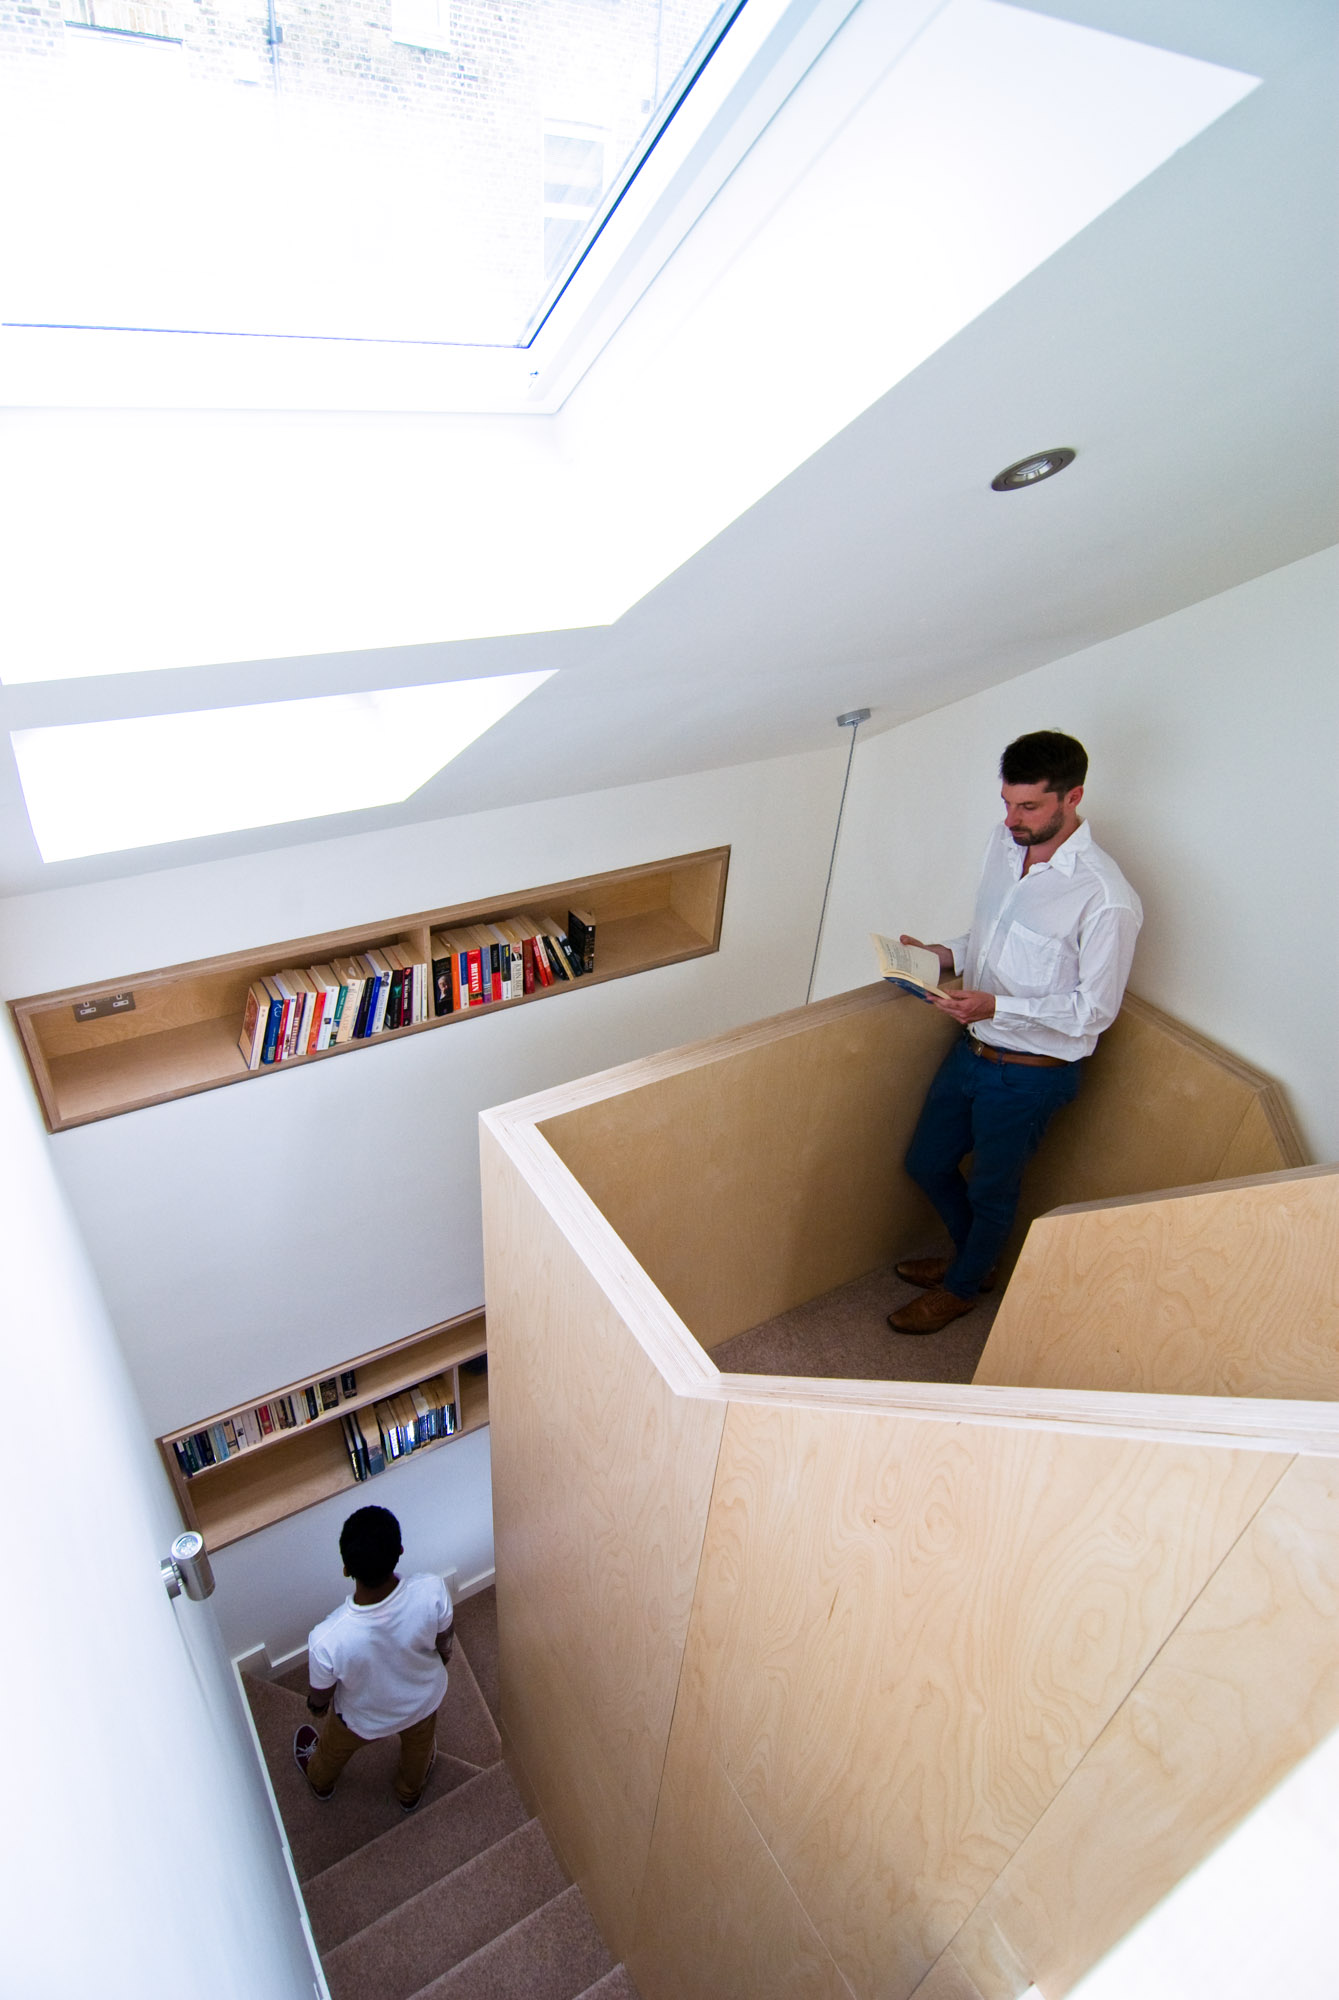 Original plywood staircase with plywood bookshelves incorporated into the walls.